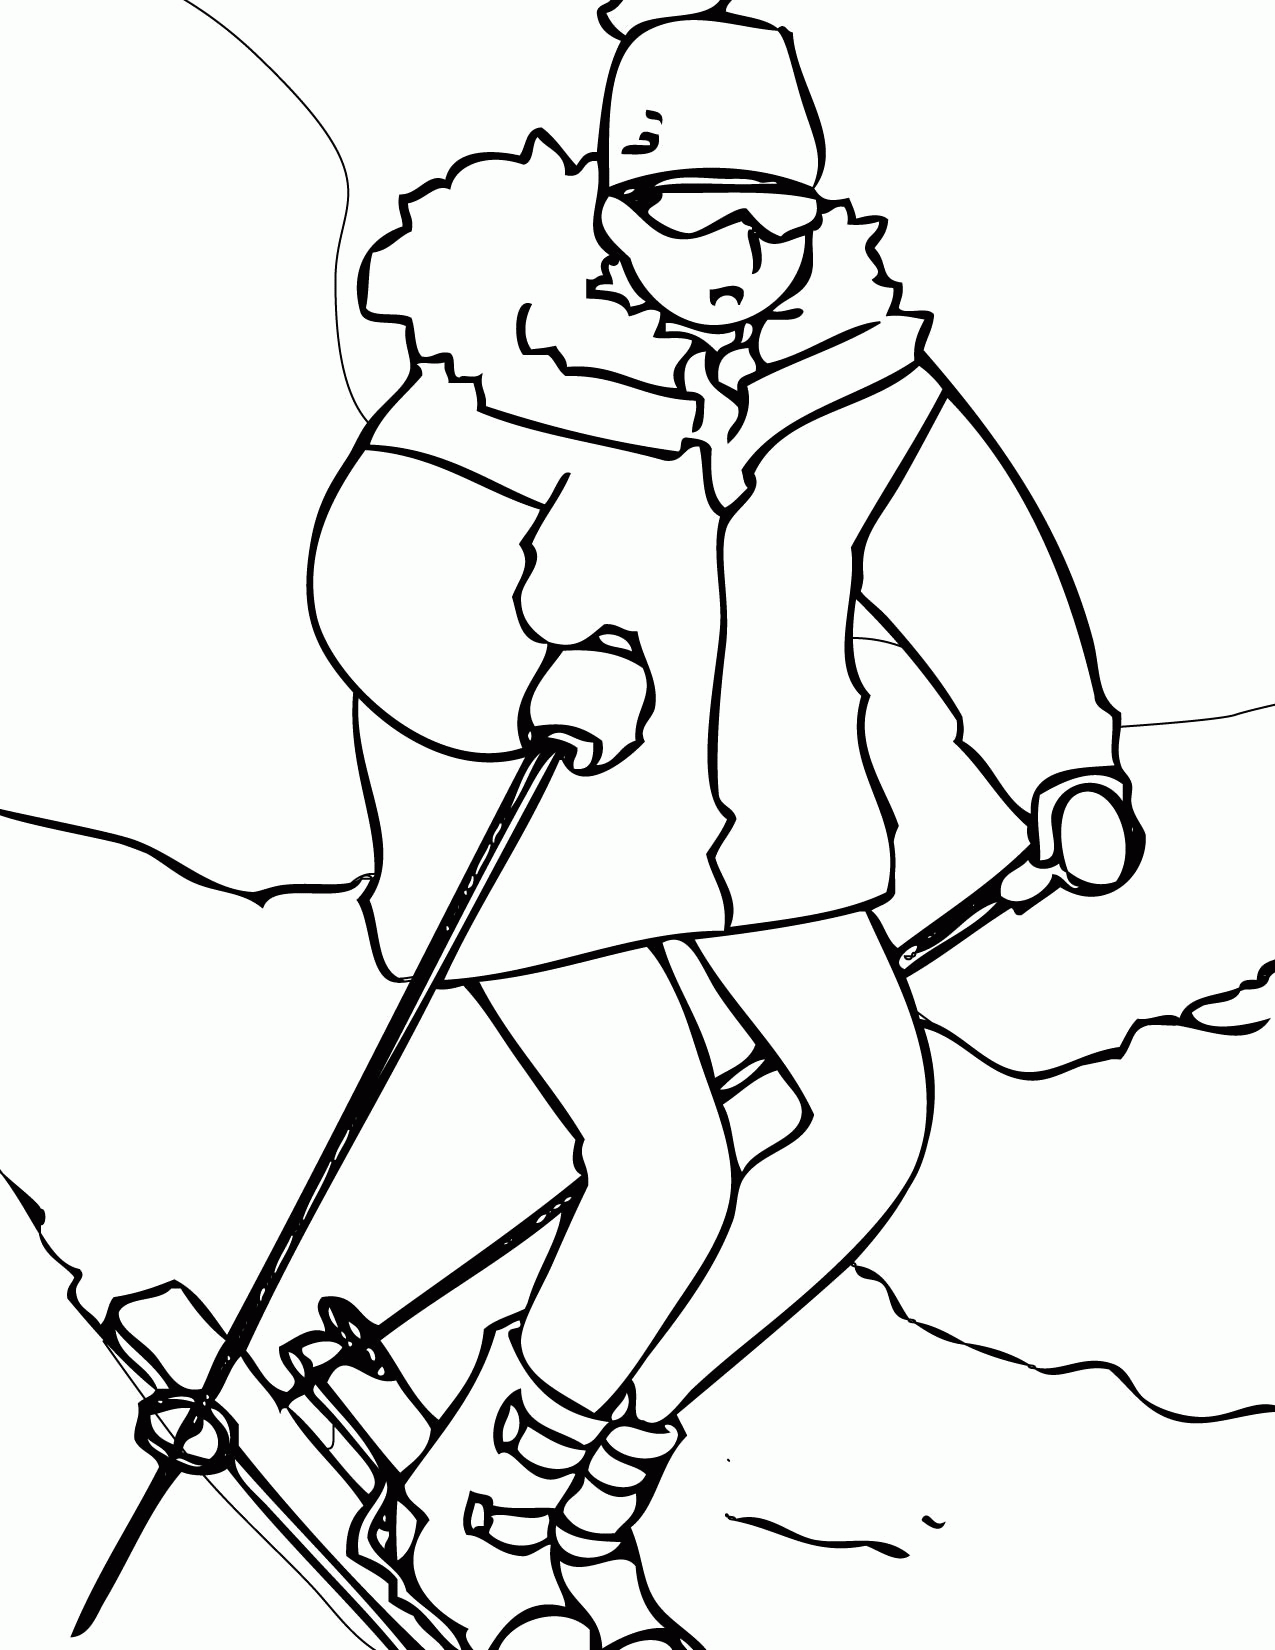 Winter Sports Coloring Pages - Handipoints